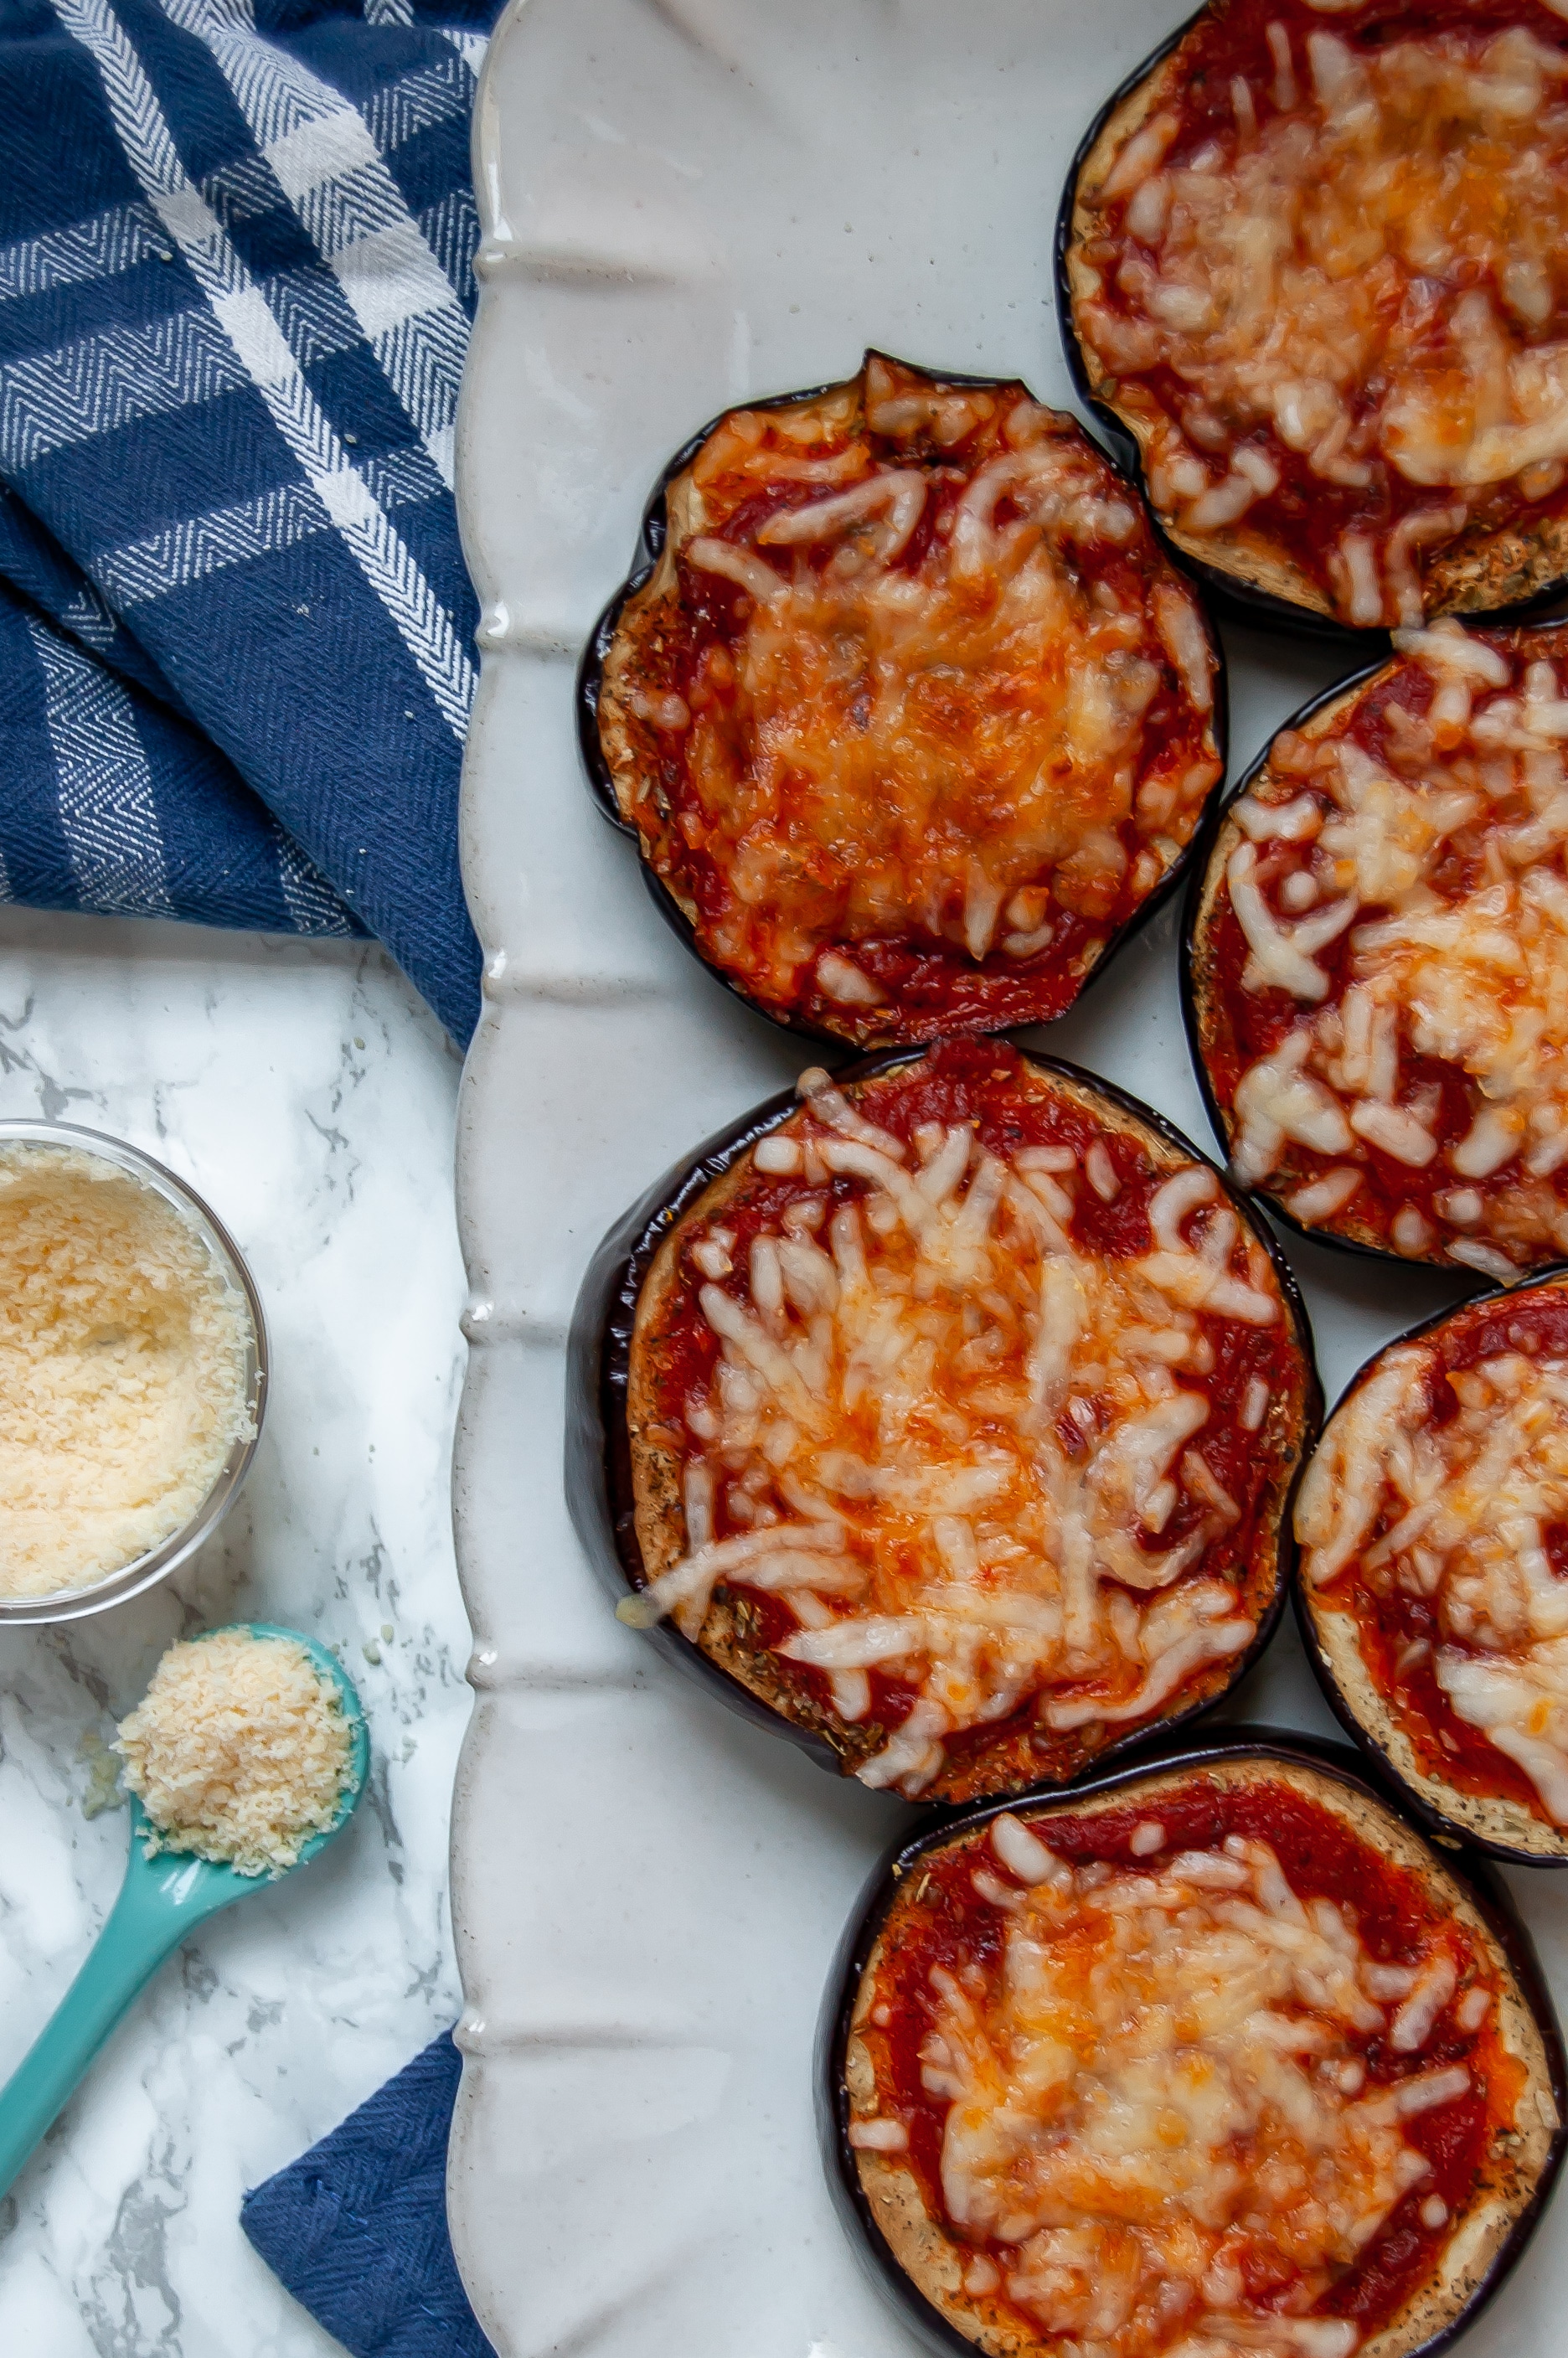 Eggplant pizzas are a healthy eggplant recipe to help you and your family eat more kid-friendly vegetables! Vary the flavors with fun toppings of choice!